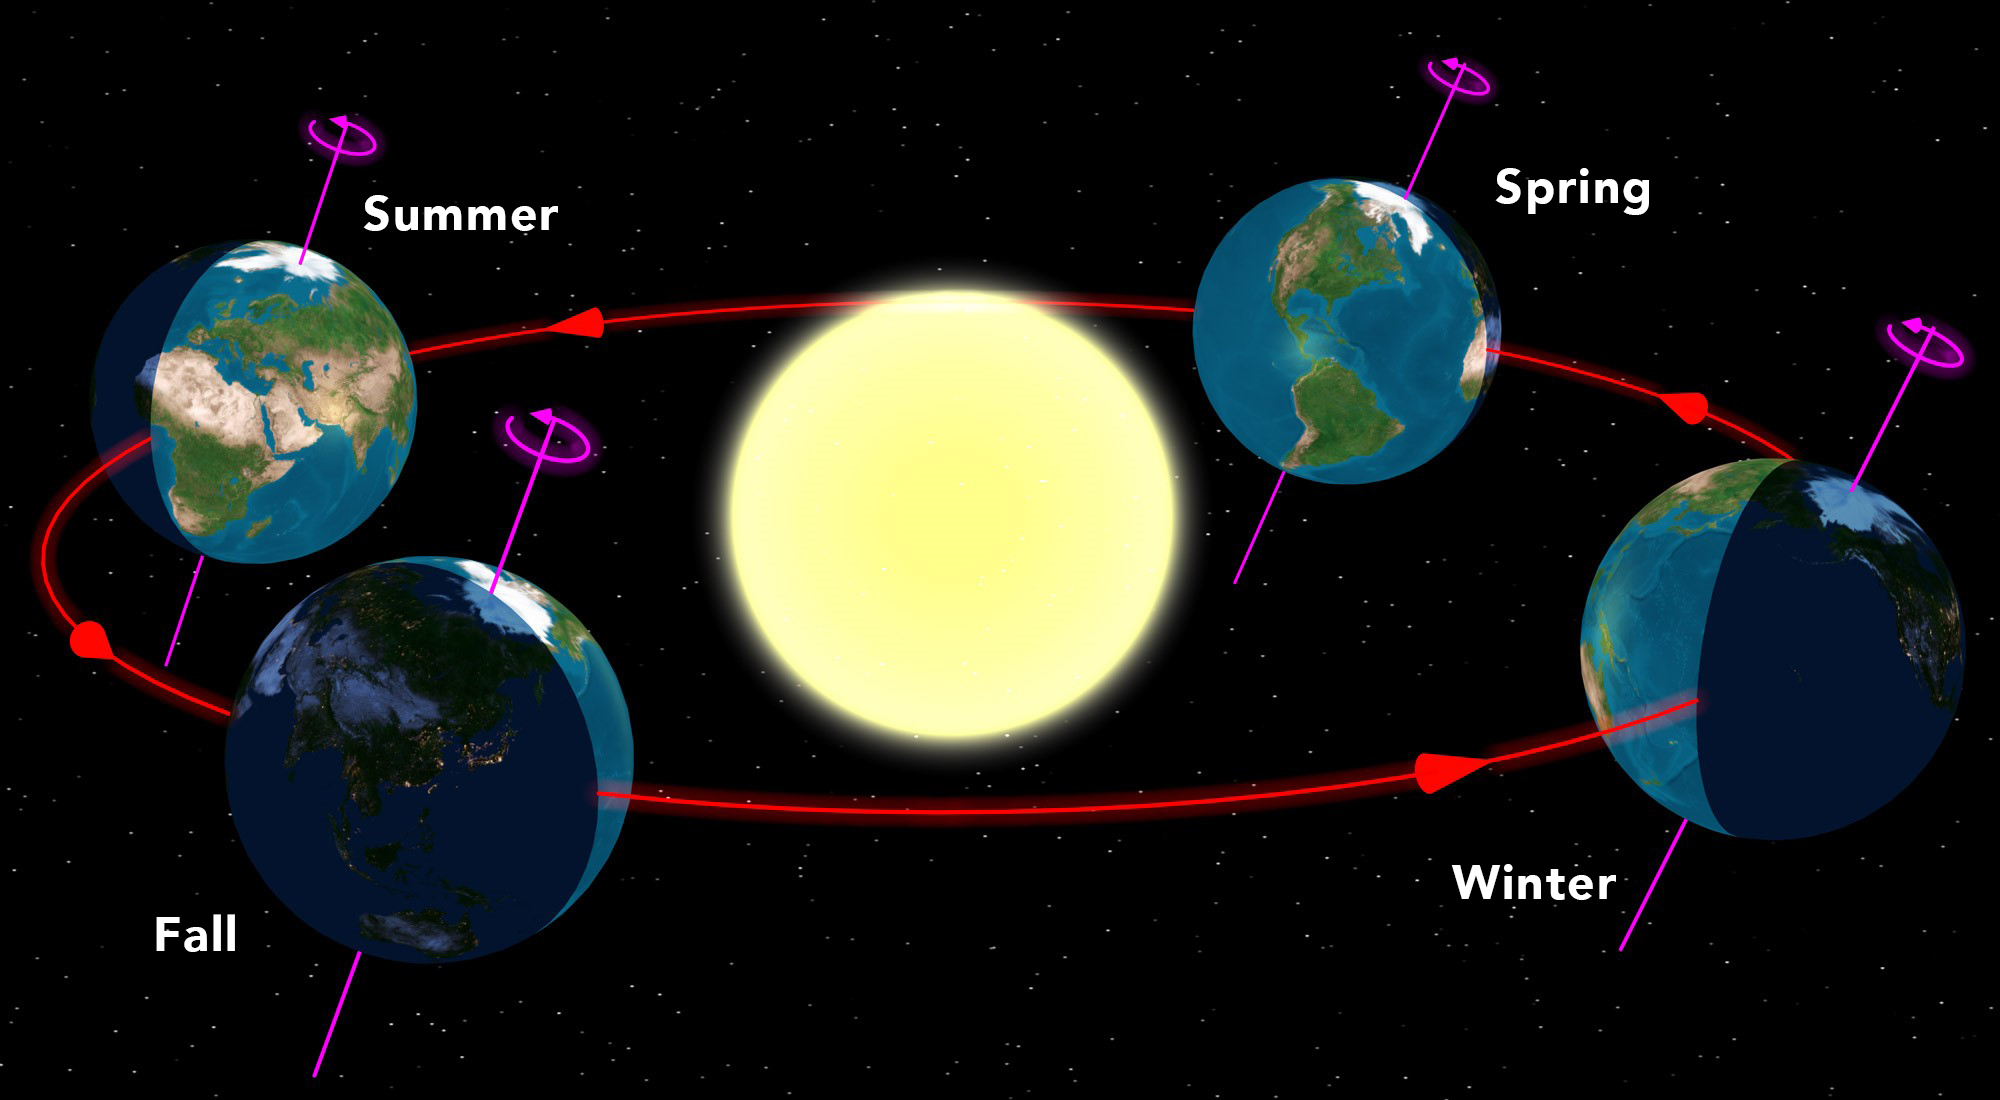 The earth's orbit around the sun. At spring- and autumn equinox, the tilt of the globe is exactly right for receiving the particles from the sun more effectively.